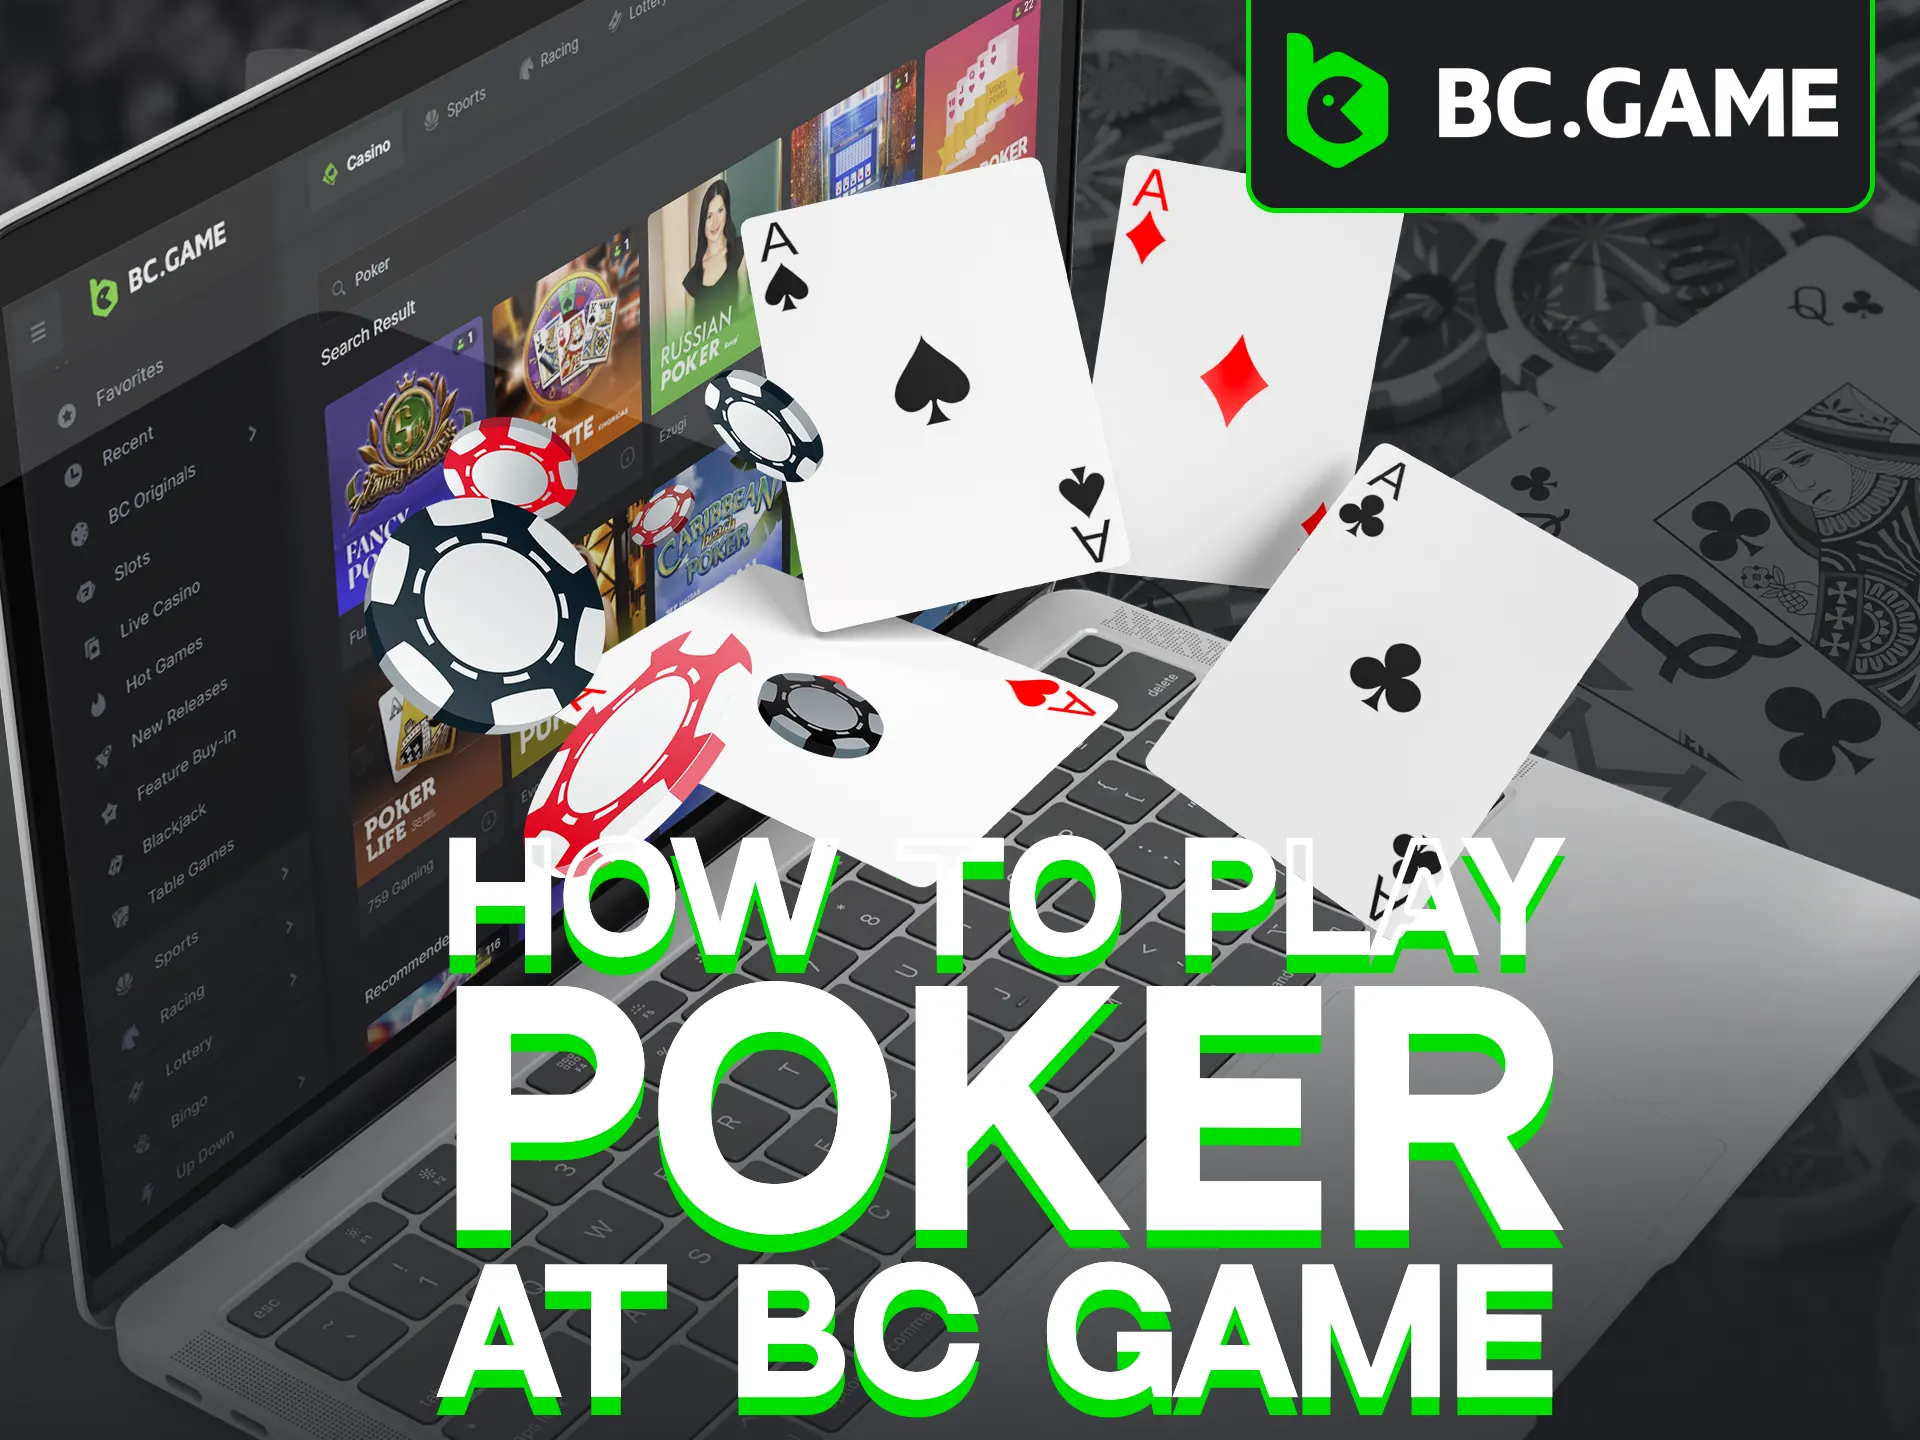 Start playing poker at BC Game in three easy steps.